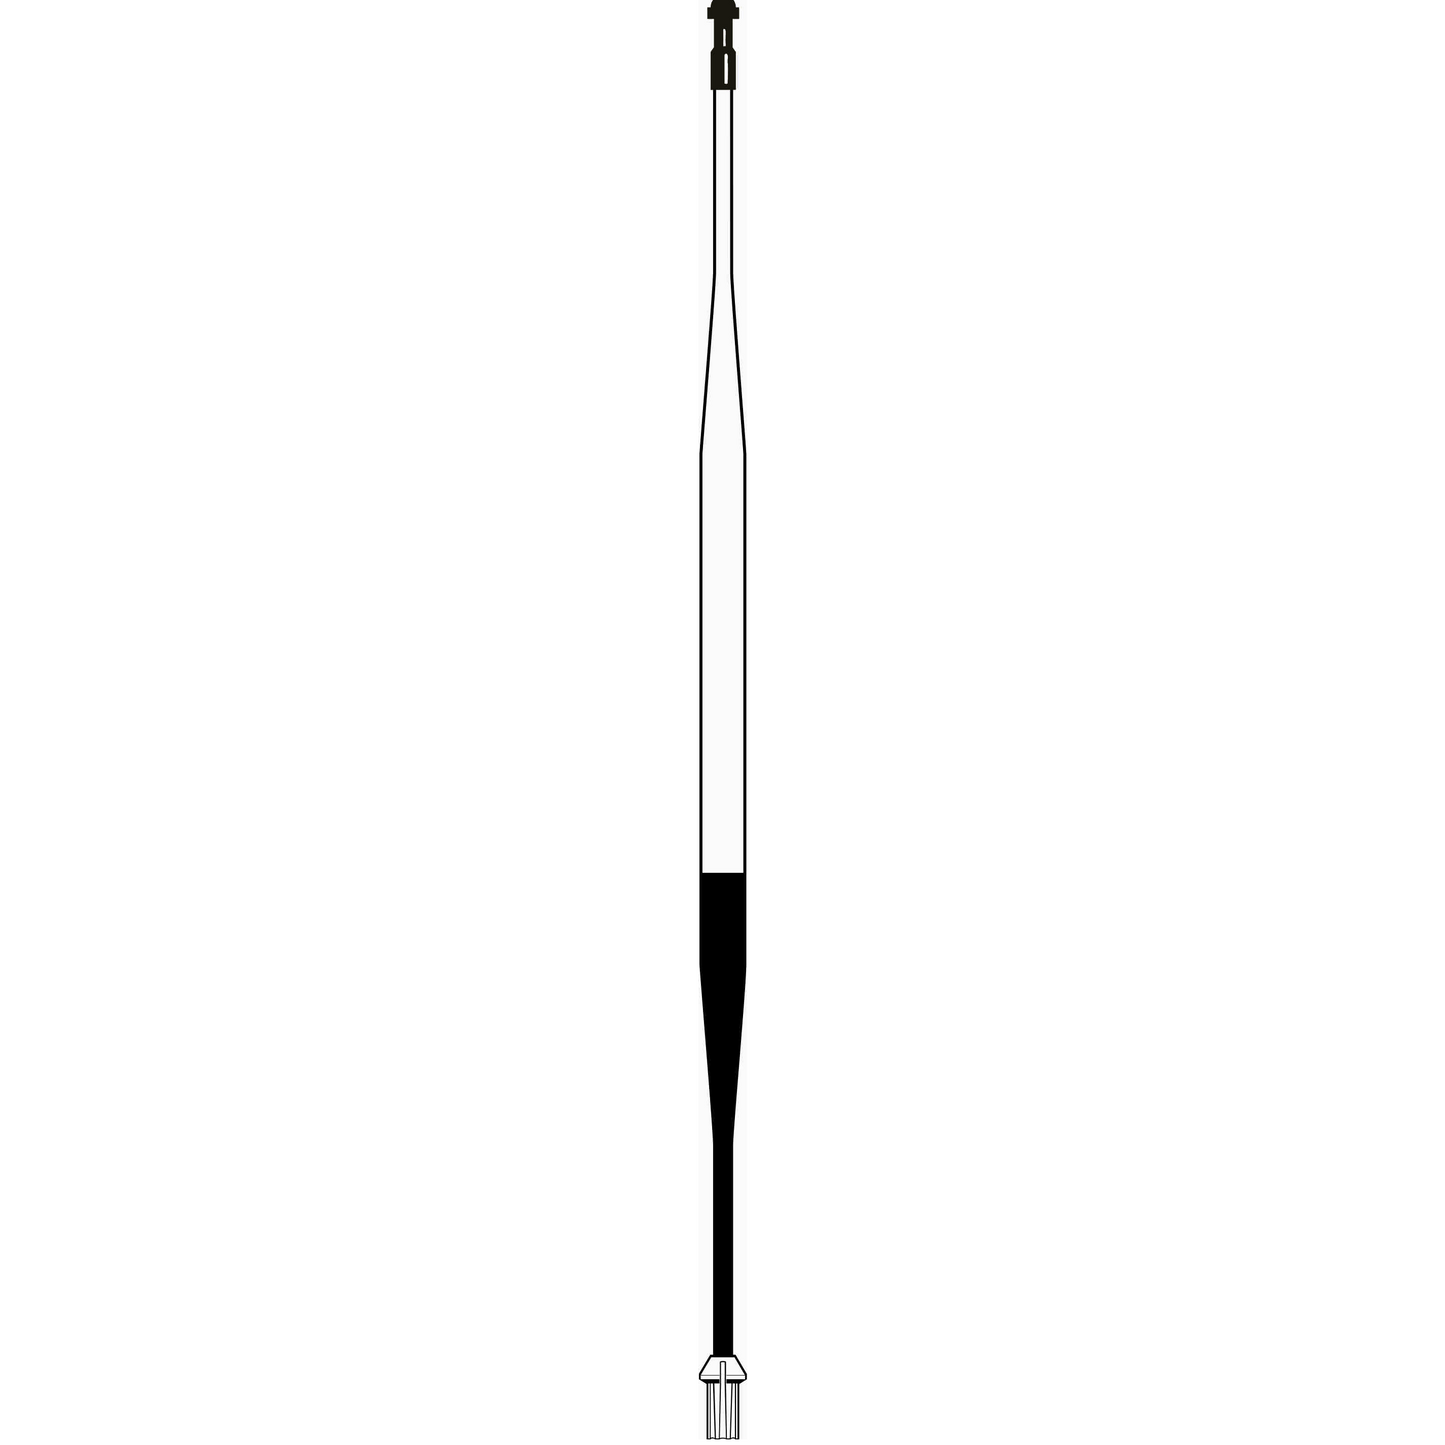 Tournament golf flagstick 7,5' in white with 1 black stripe